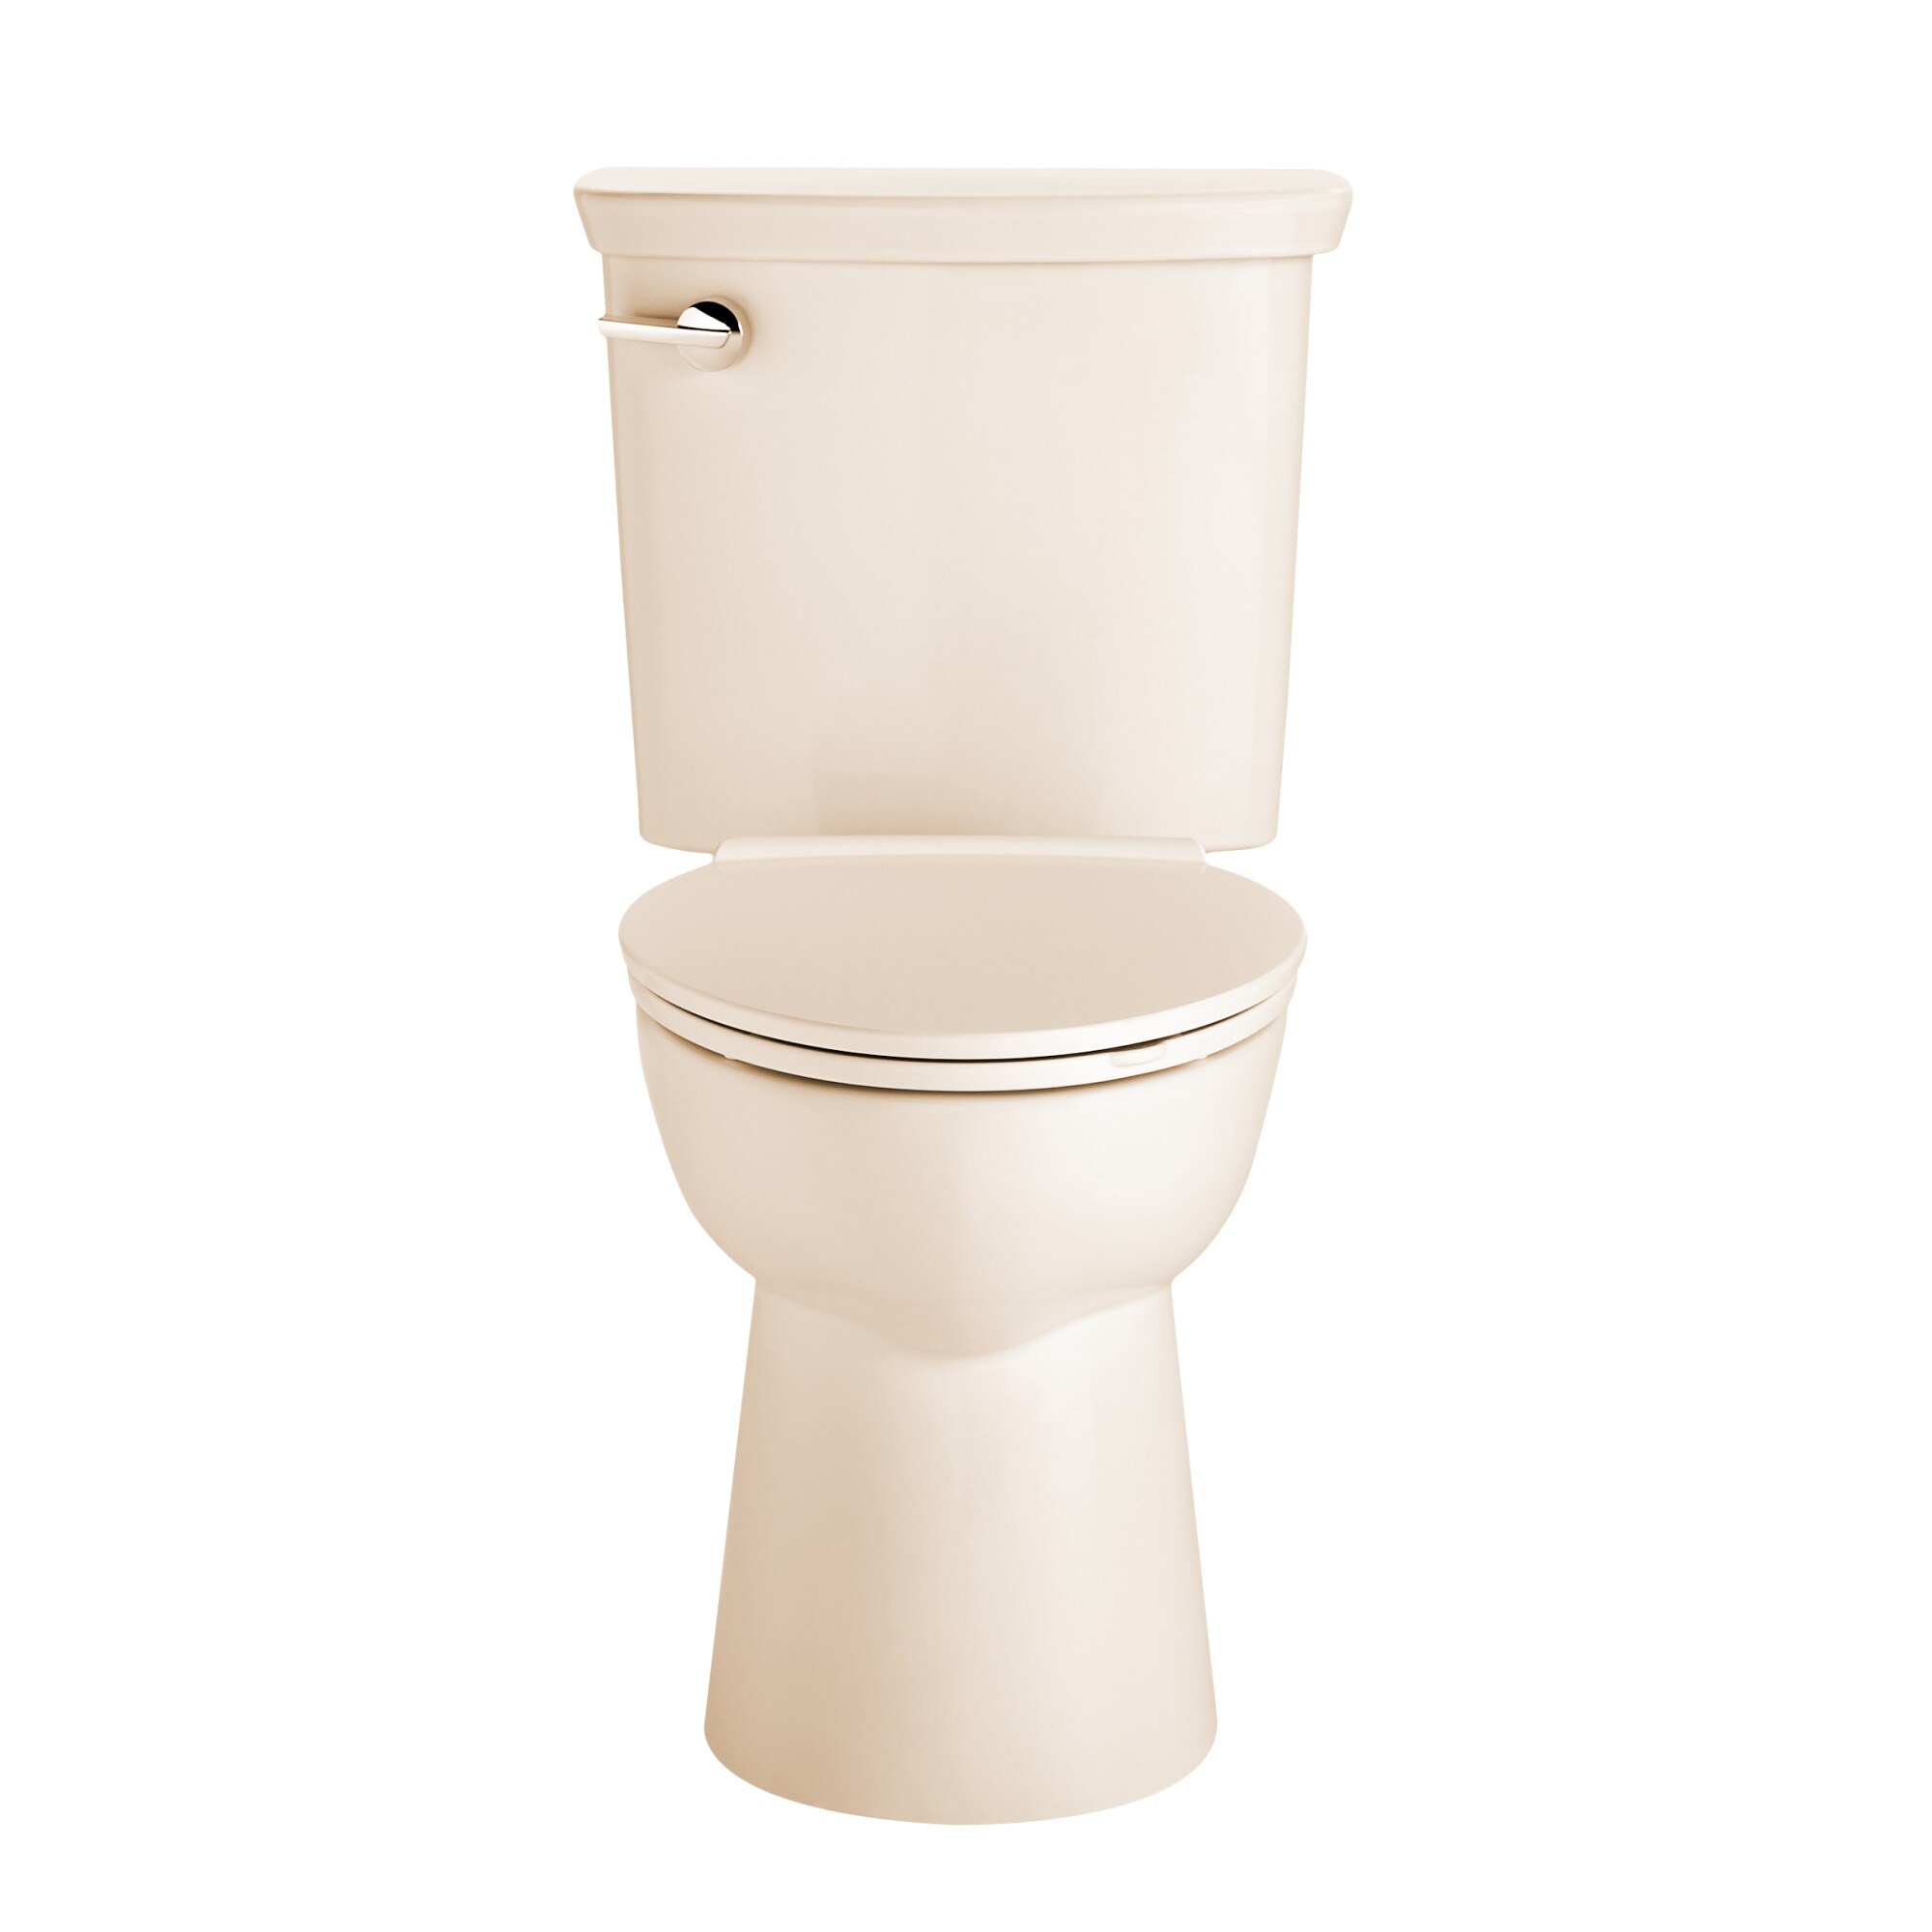 American Standard 4385A105.020 Vormax High Efficiency Toilet Tank with Right Hand Trip Lever White 